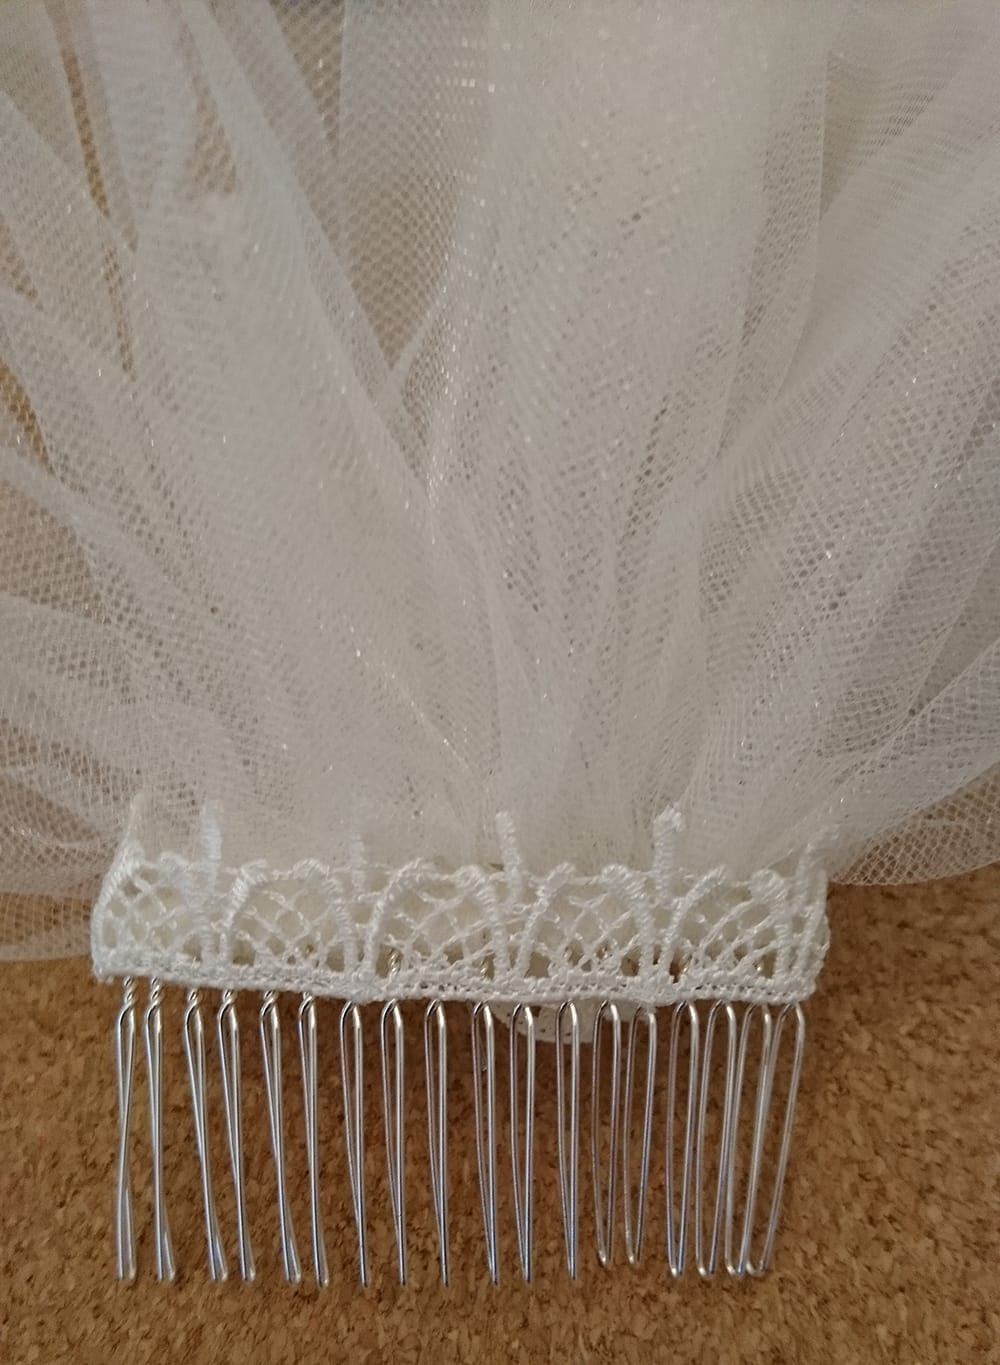 How To Make A Wedding Veil With Lace Trim
 How to Make… A Bridal Veil